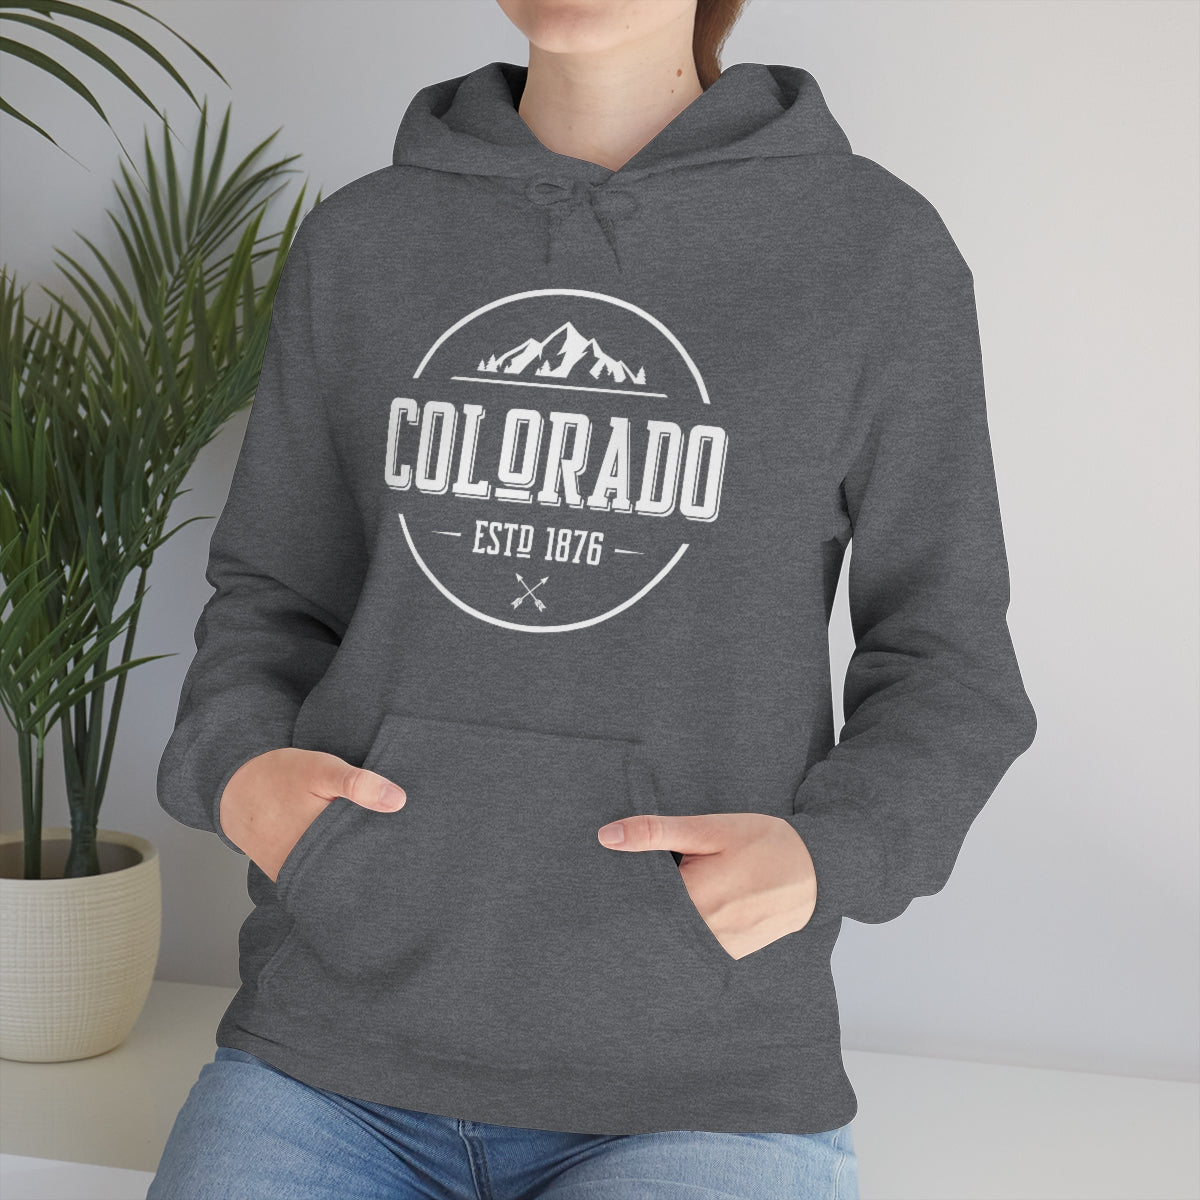 Geo Retro Car Company Pullover Hoodie Adult, Tall and Youth Sizes 